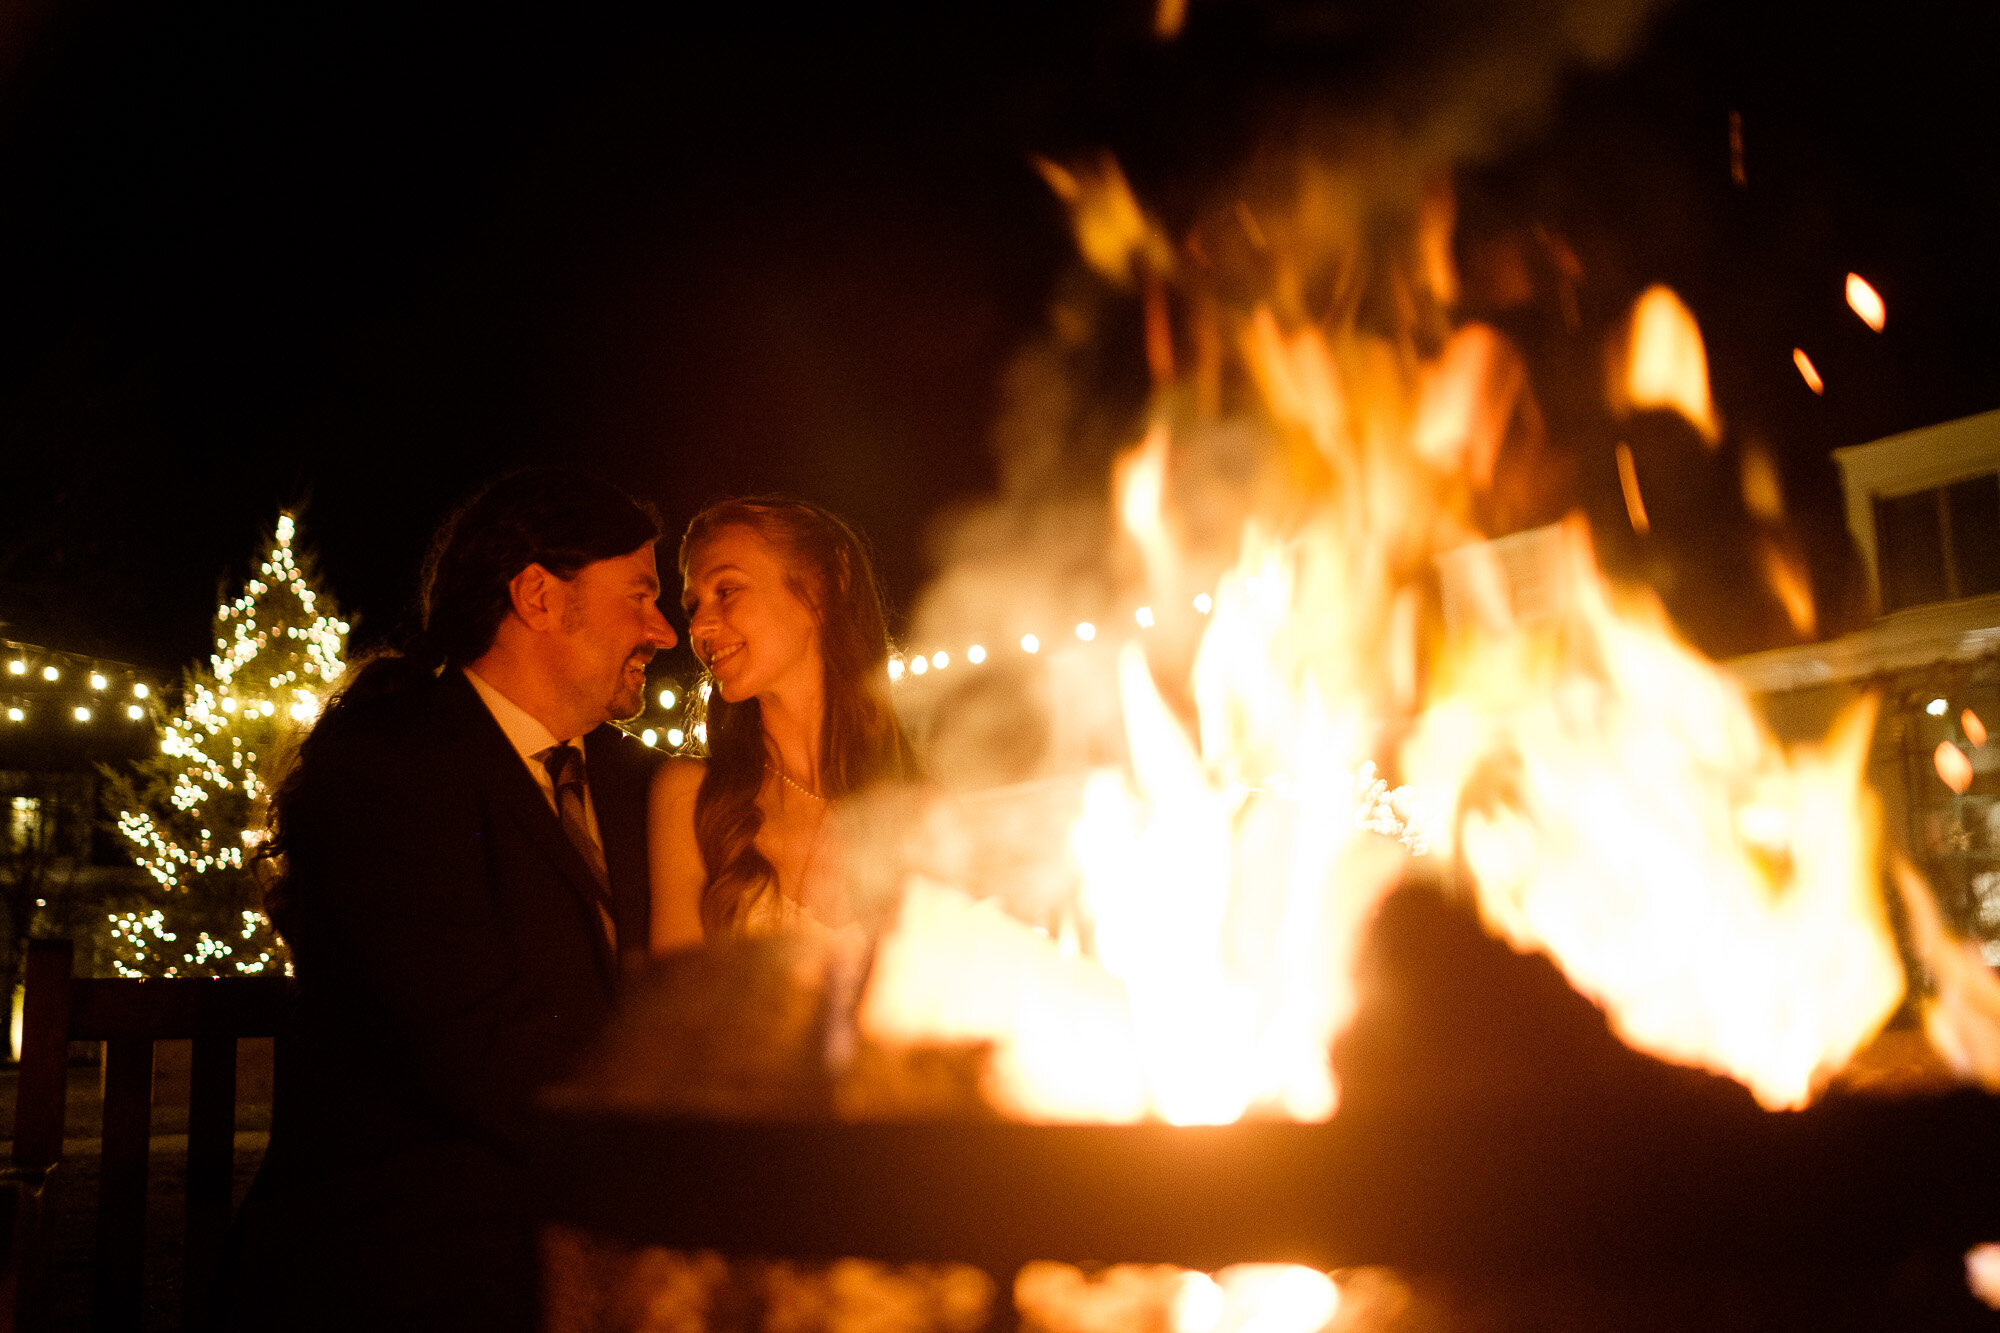  A night time wedding portrait of Laura + Raymond as they pose by the open fire at Langdon Hall after their intimate winter wedding.  Wedding Photograph by Toronto wedding photographer Scott Williams (www.scottwilliamsphotographer.com) 